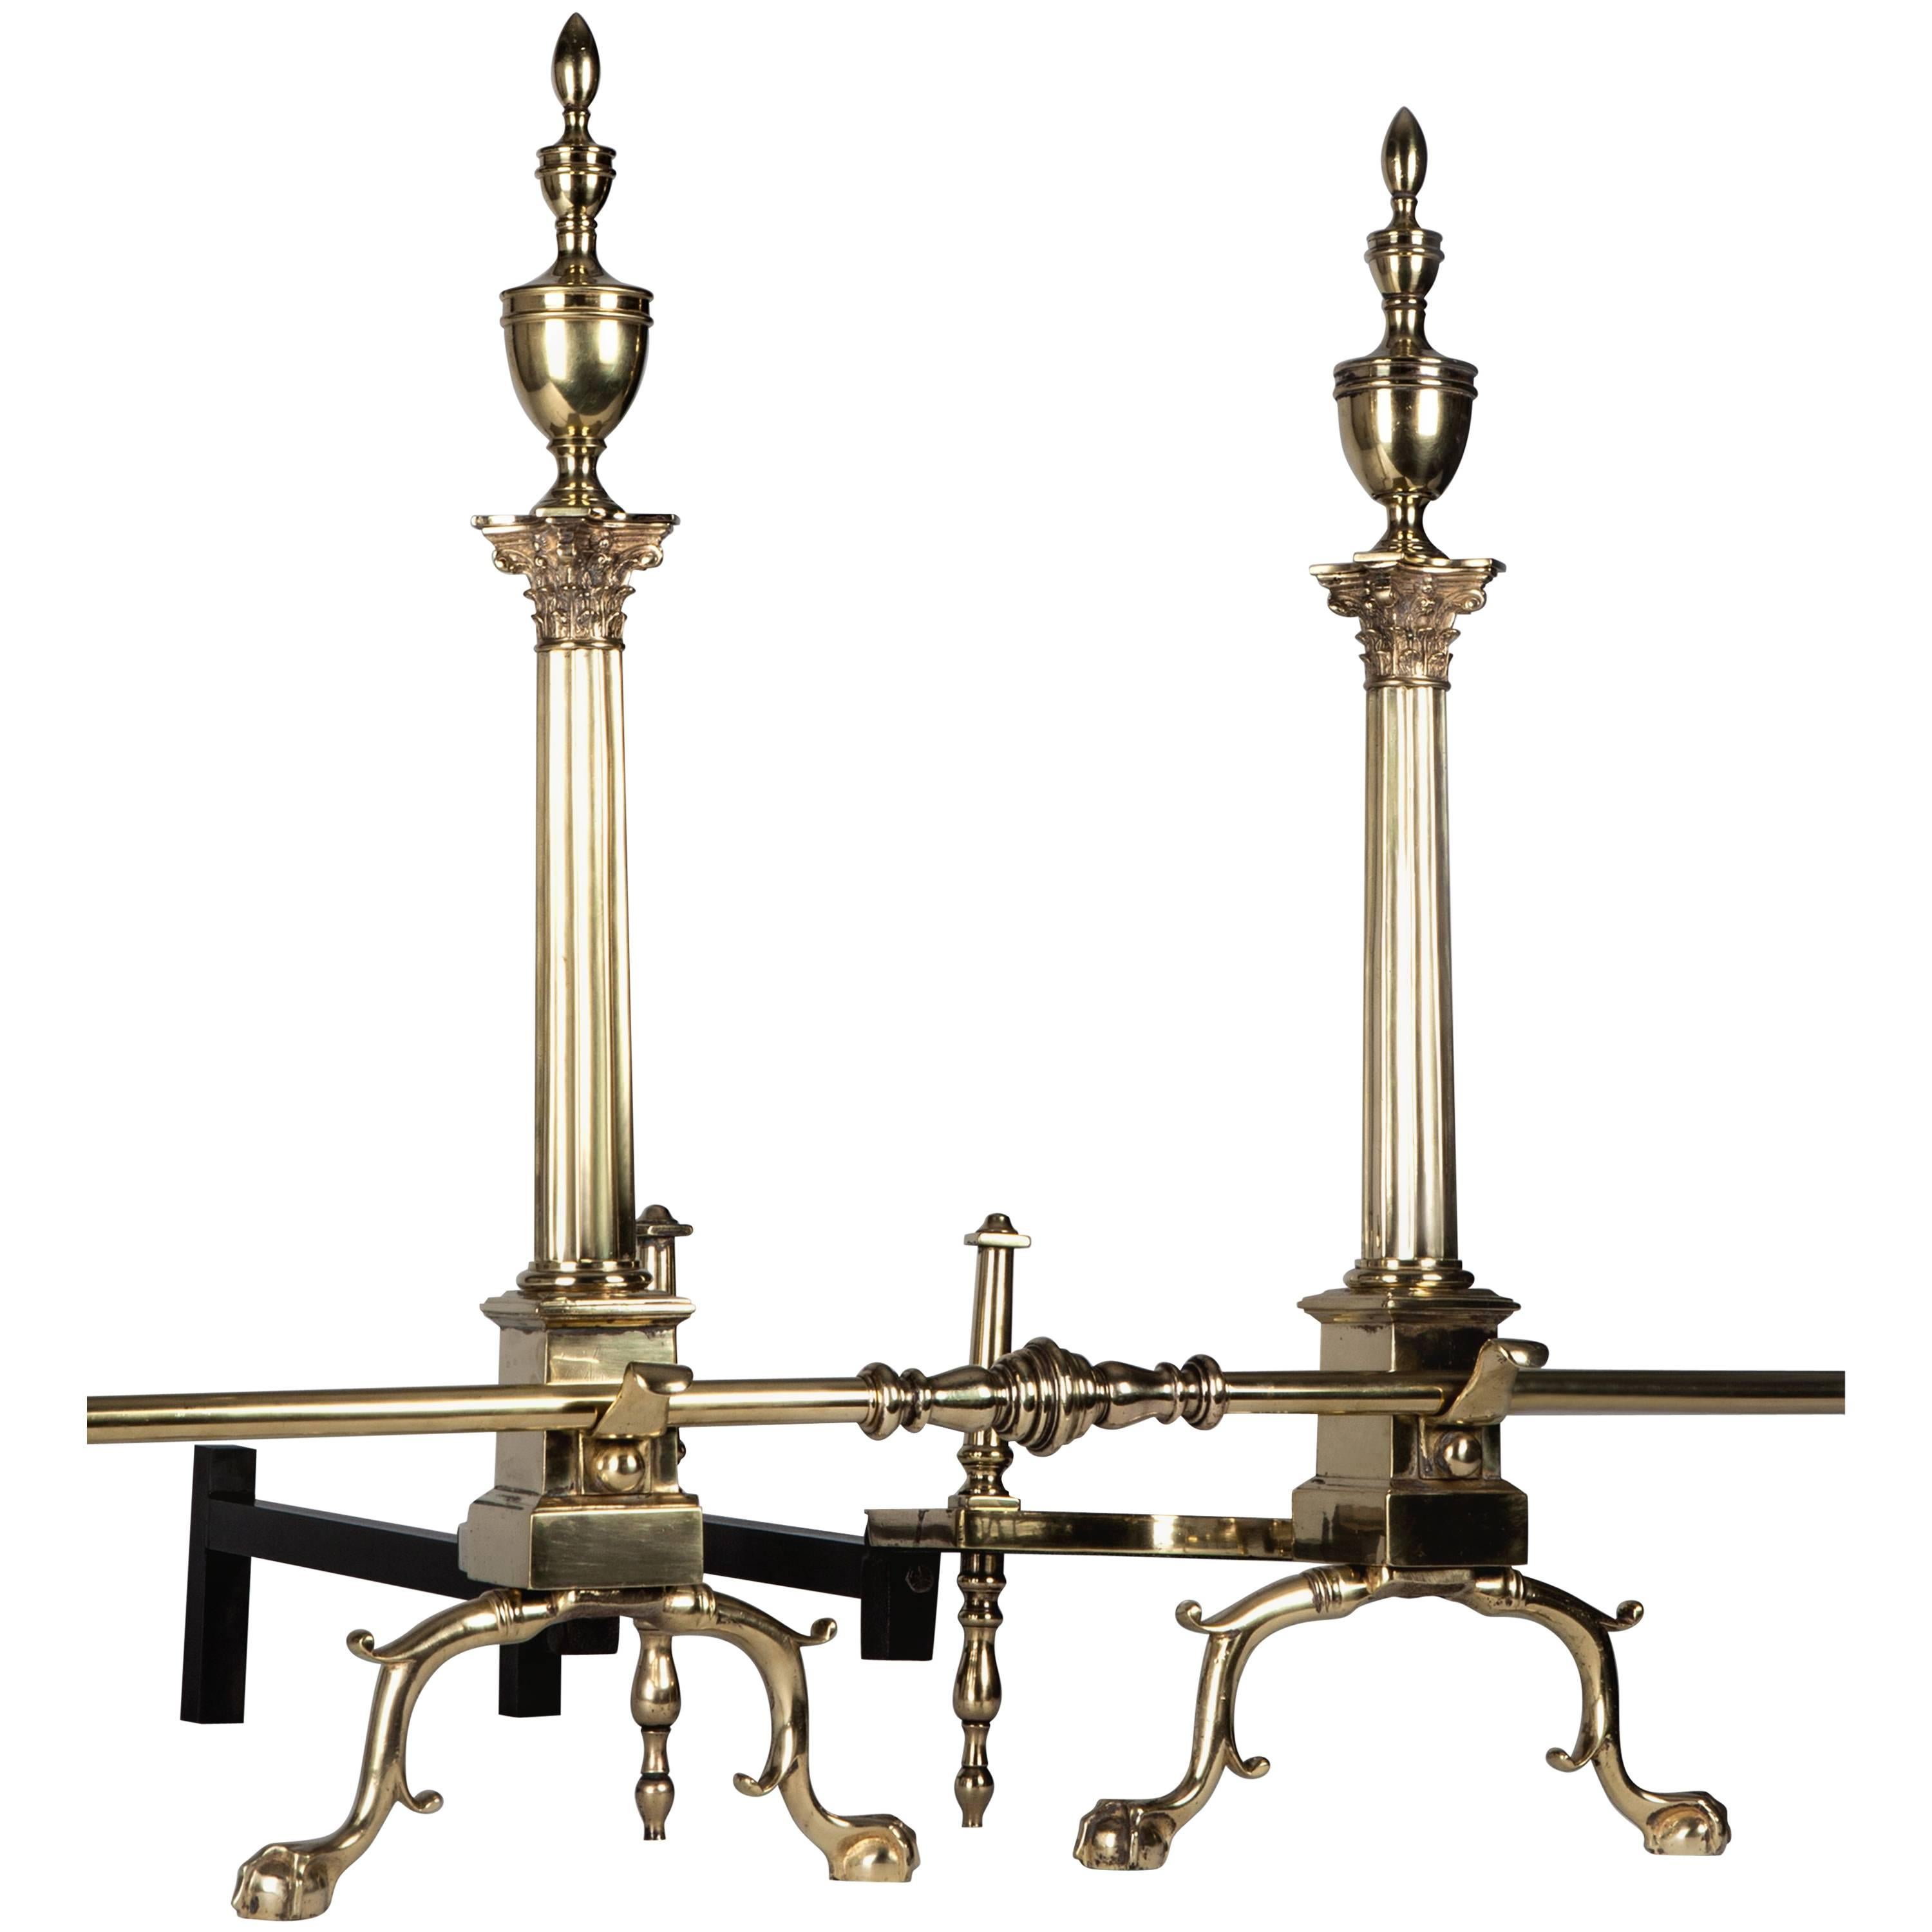 AFP0591
A pair of antique cast brass paw-footed andirons set with fluted Corinthian column bodies surmounted by turned urn form finials. Complete with a brass fender bar custom made in the Remains workshop. Circa 1920s.

Dimensions:
Overall: 30-1/2